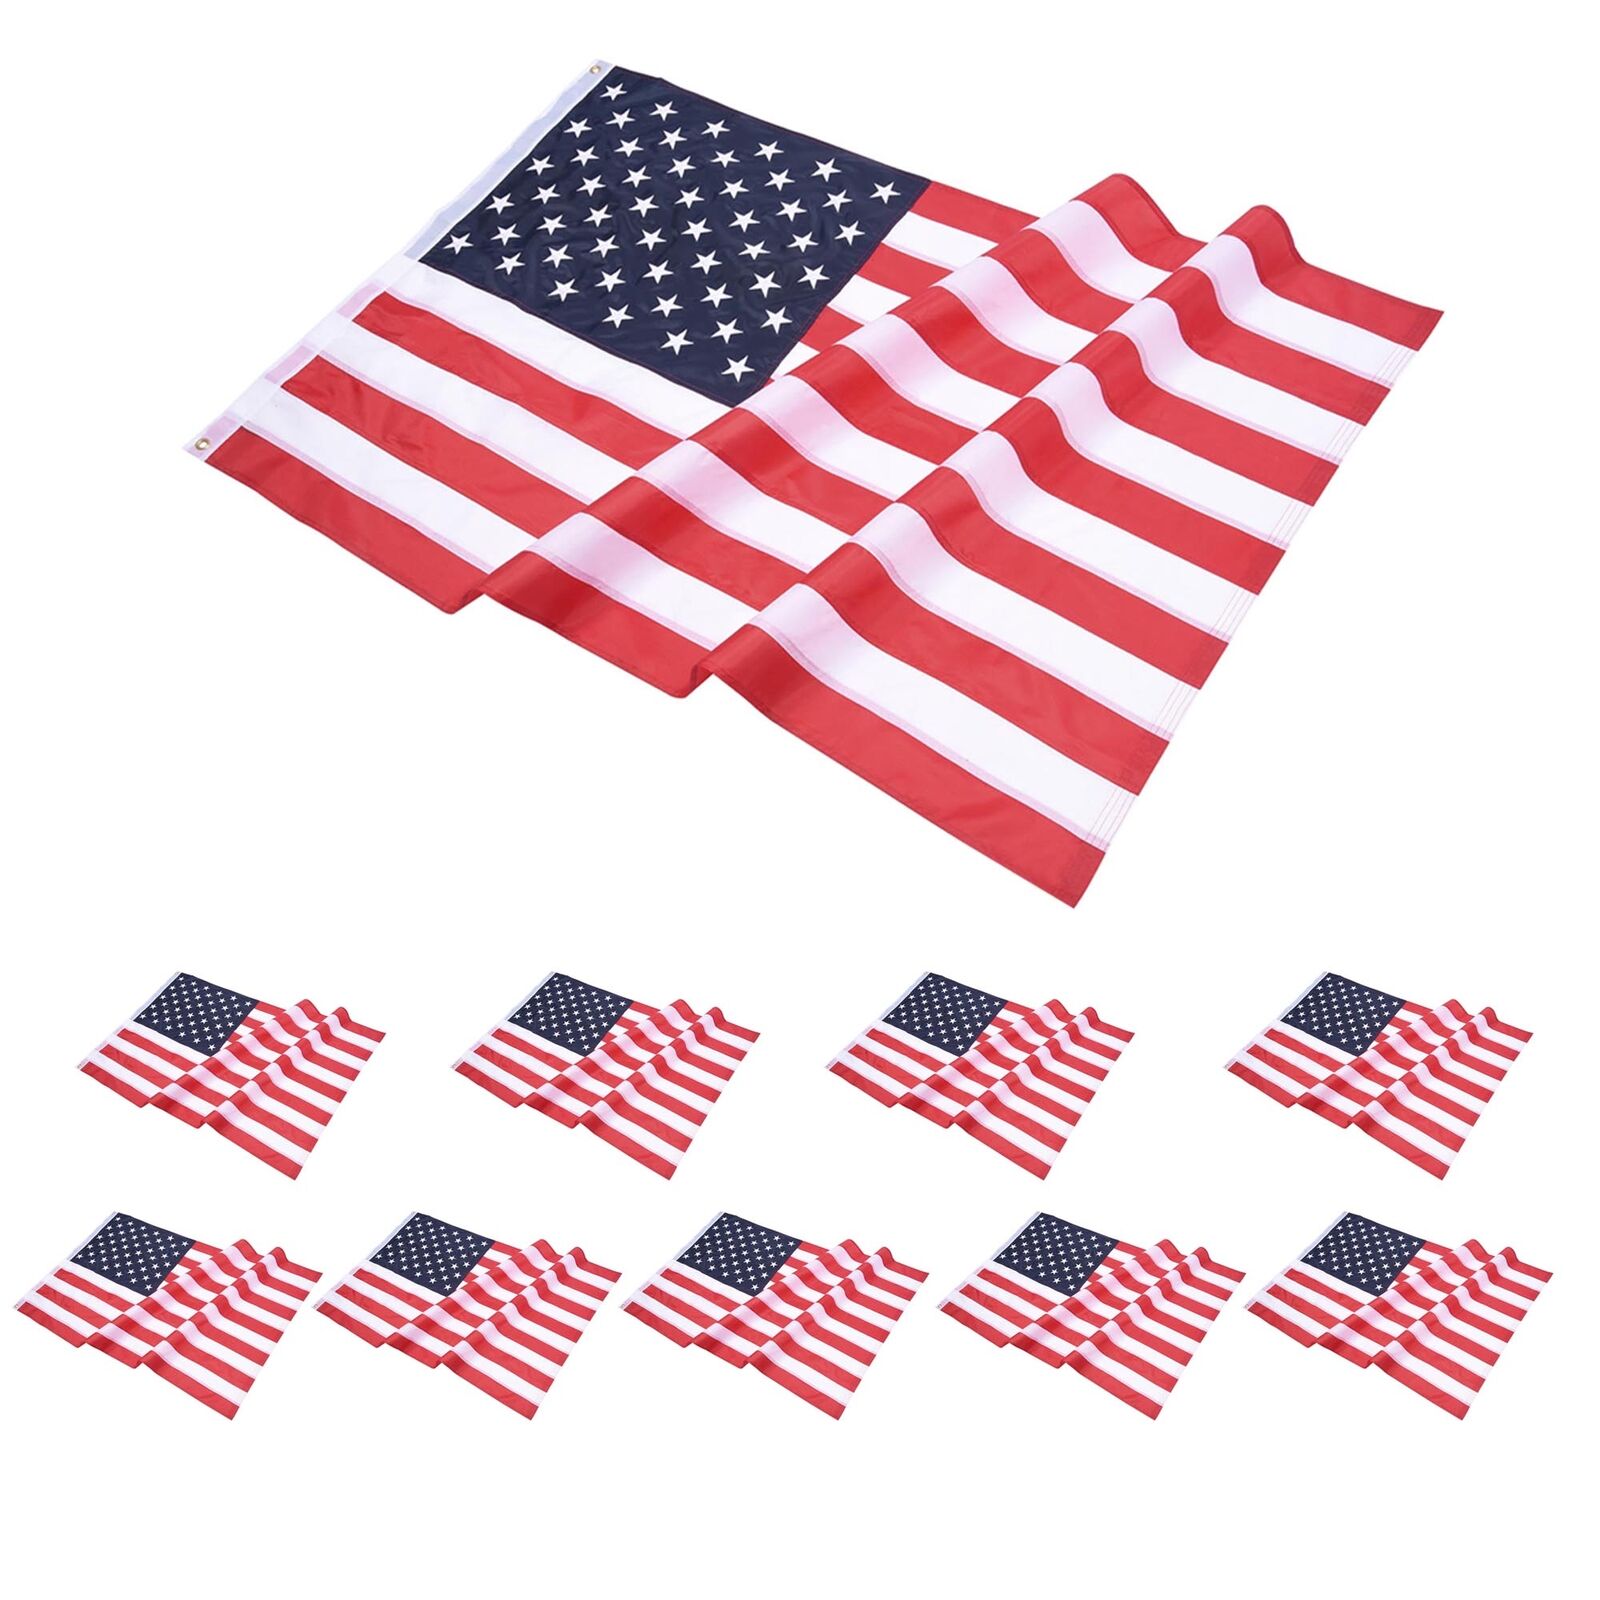 4x6 Ft US Flag Sewn Stripes Polyester Oxford Fabric Fade Resistance Yard 10 Pack